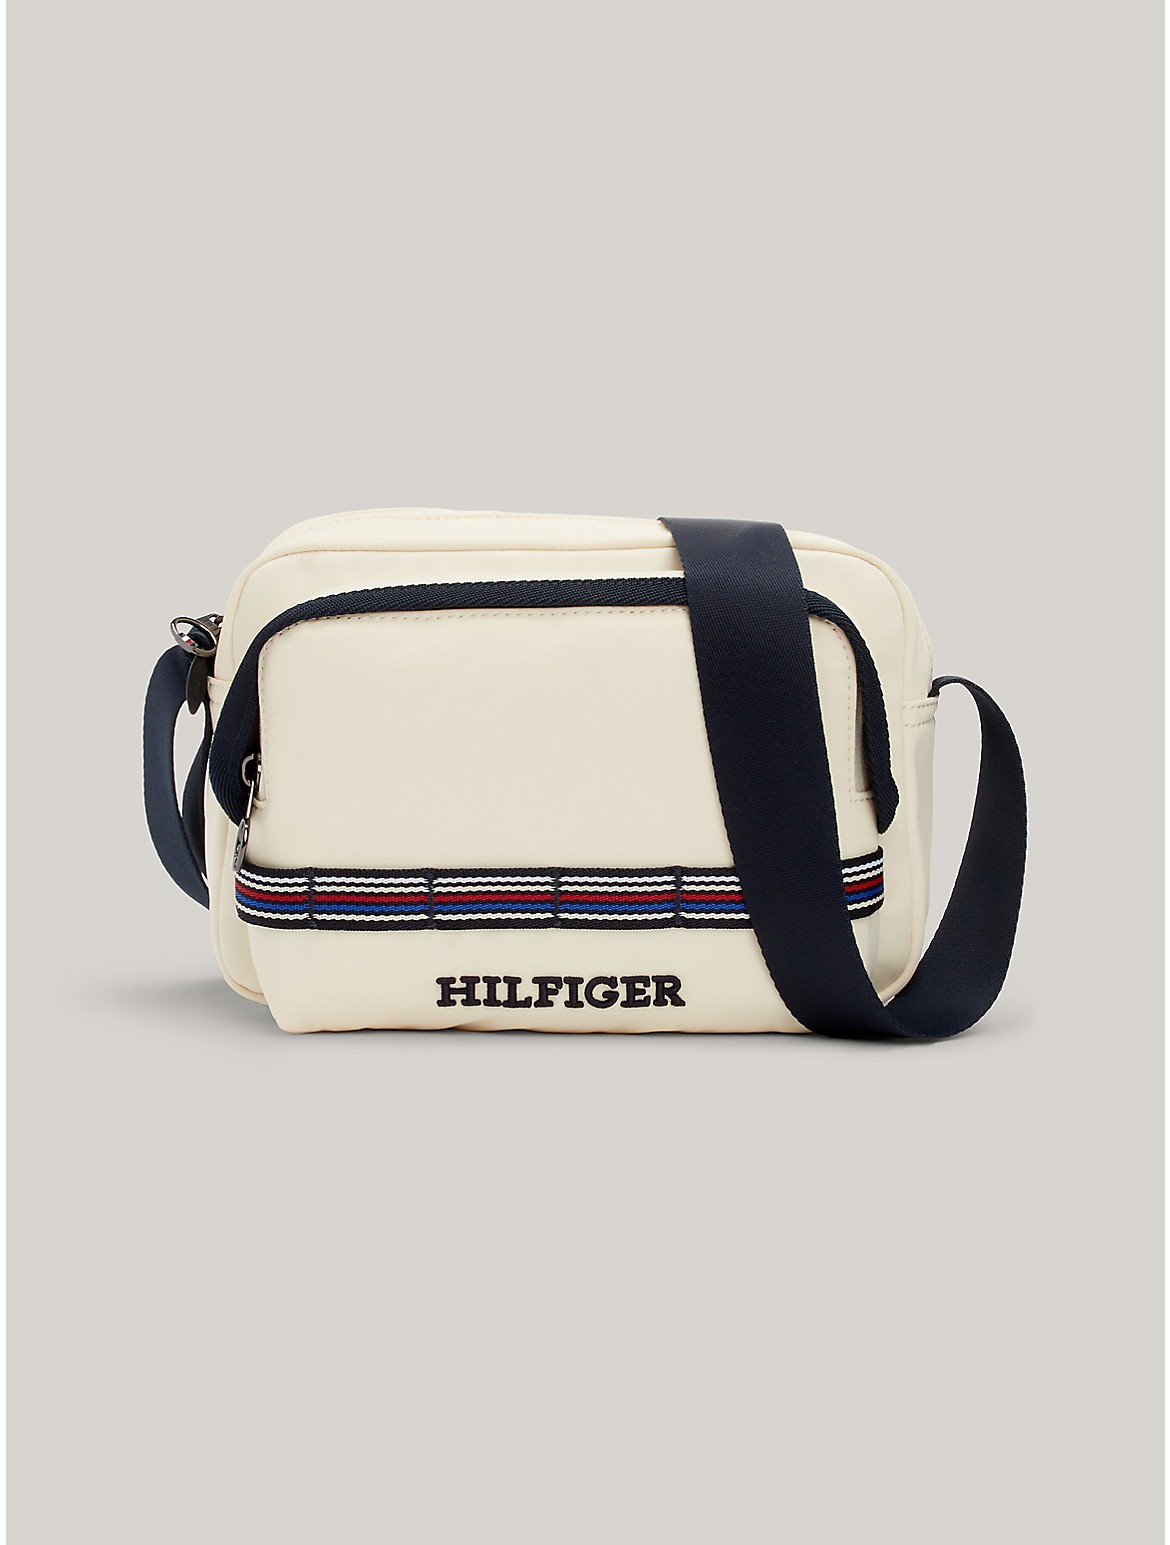 Tommy Hilfiger Men's Embroidered Monotype Crossbody Bag